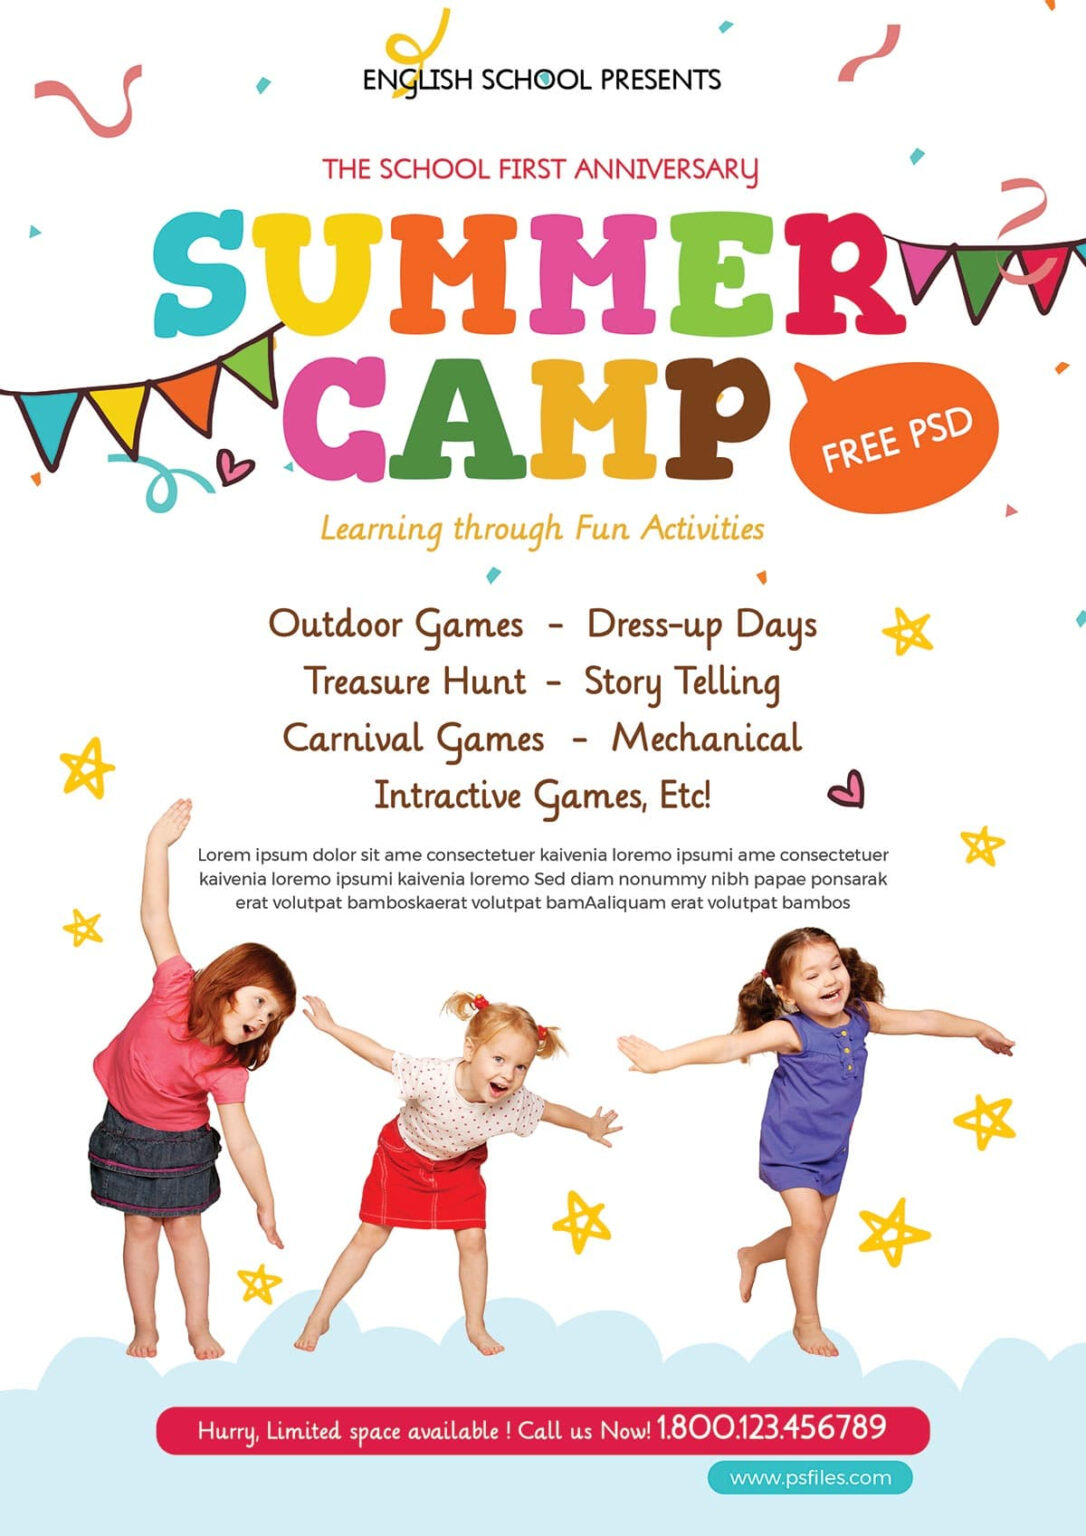 kids-summer-camp-party-free-psd-flyer-template-stockpsd-within-summer